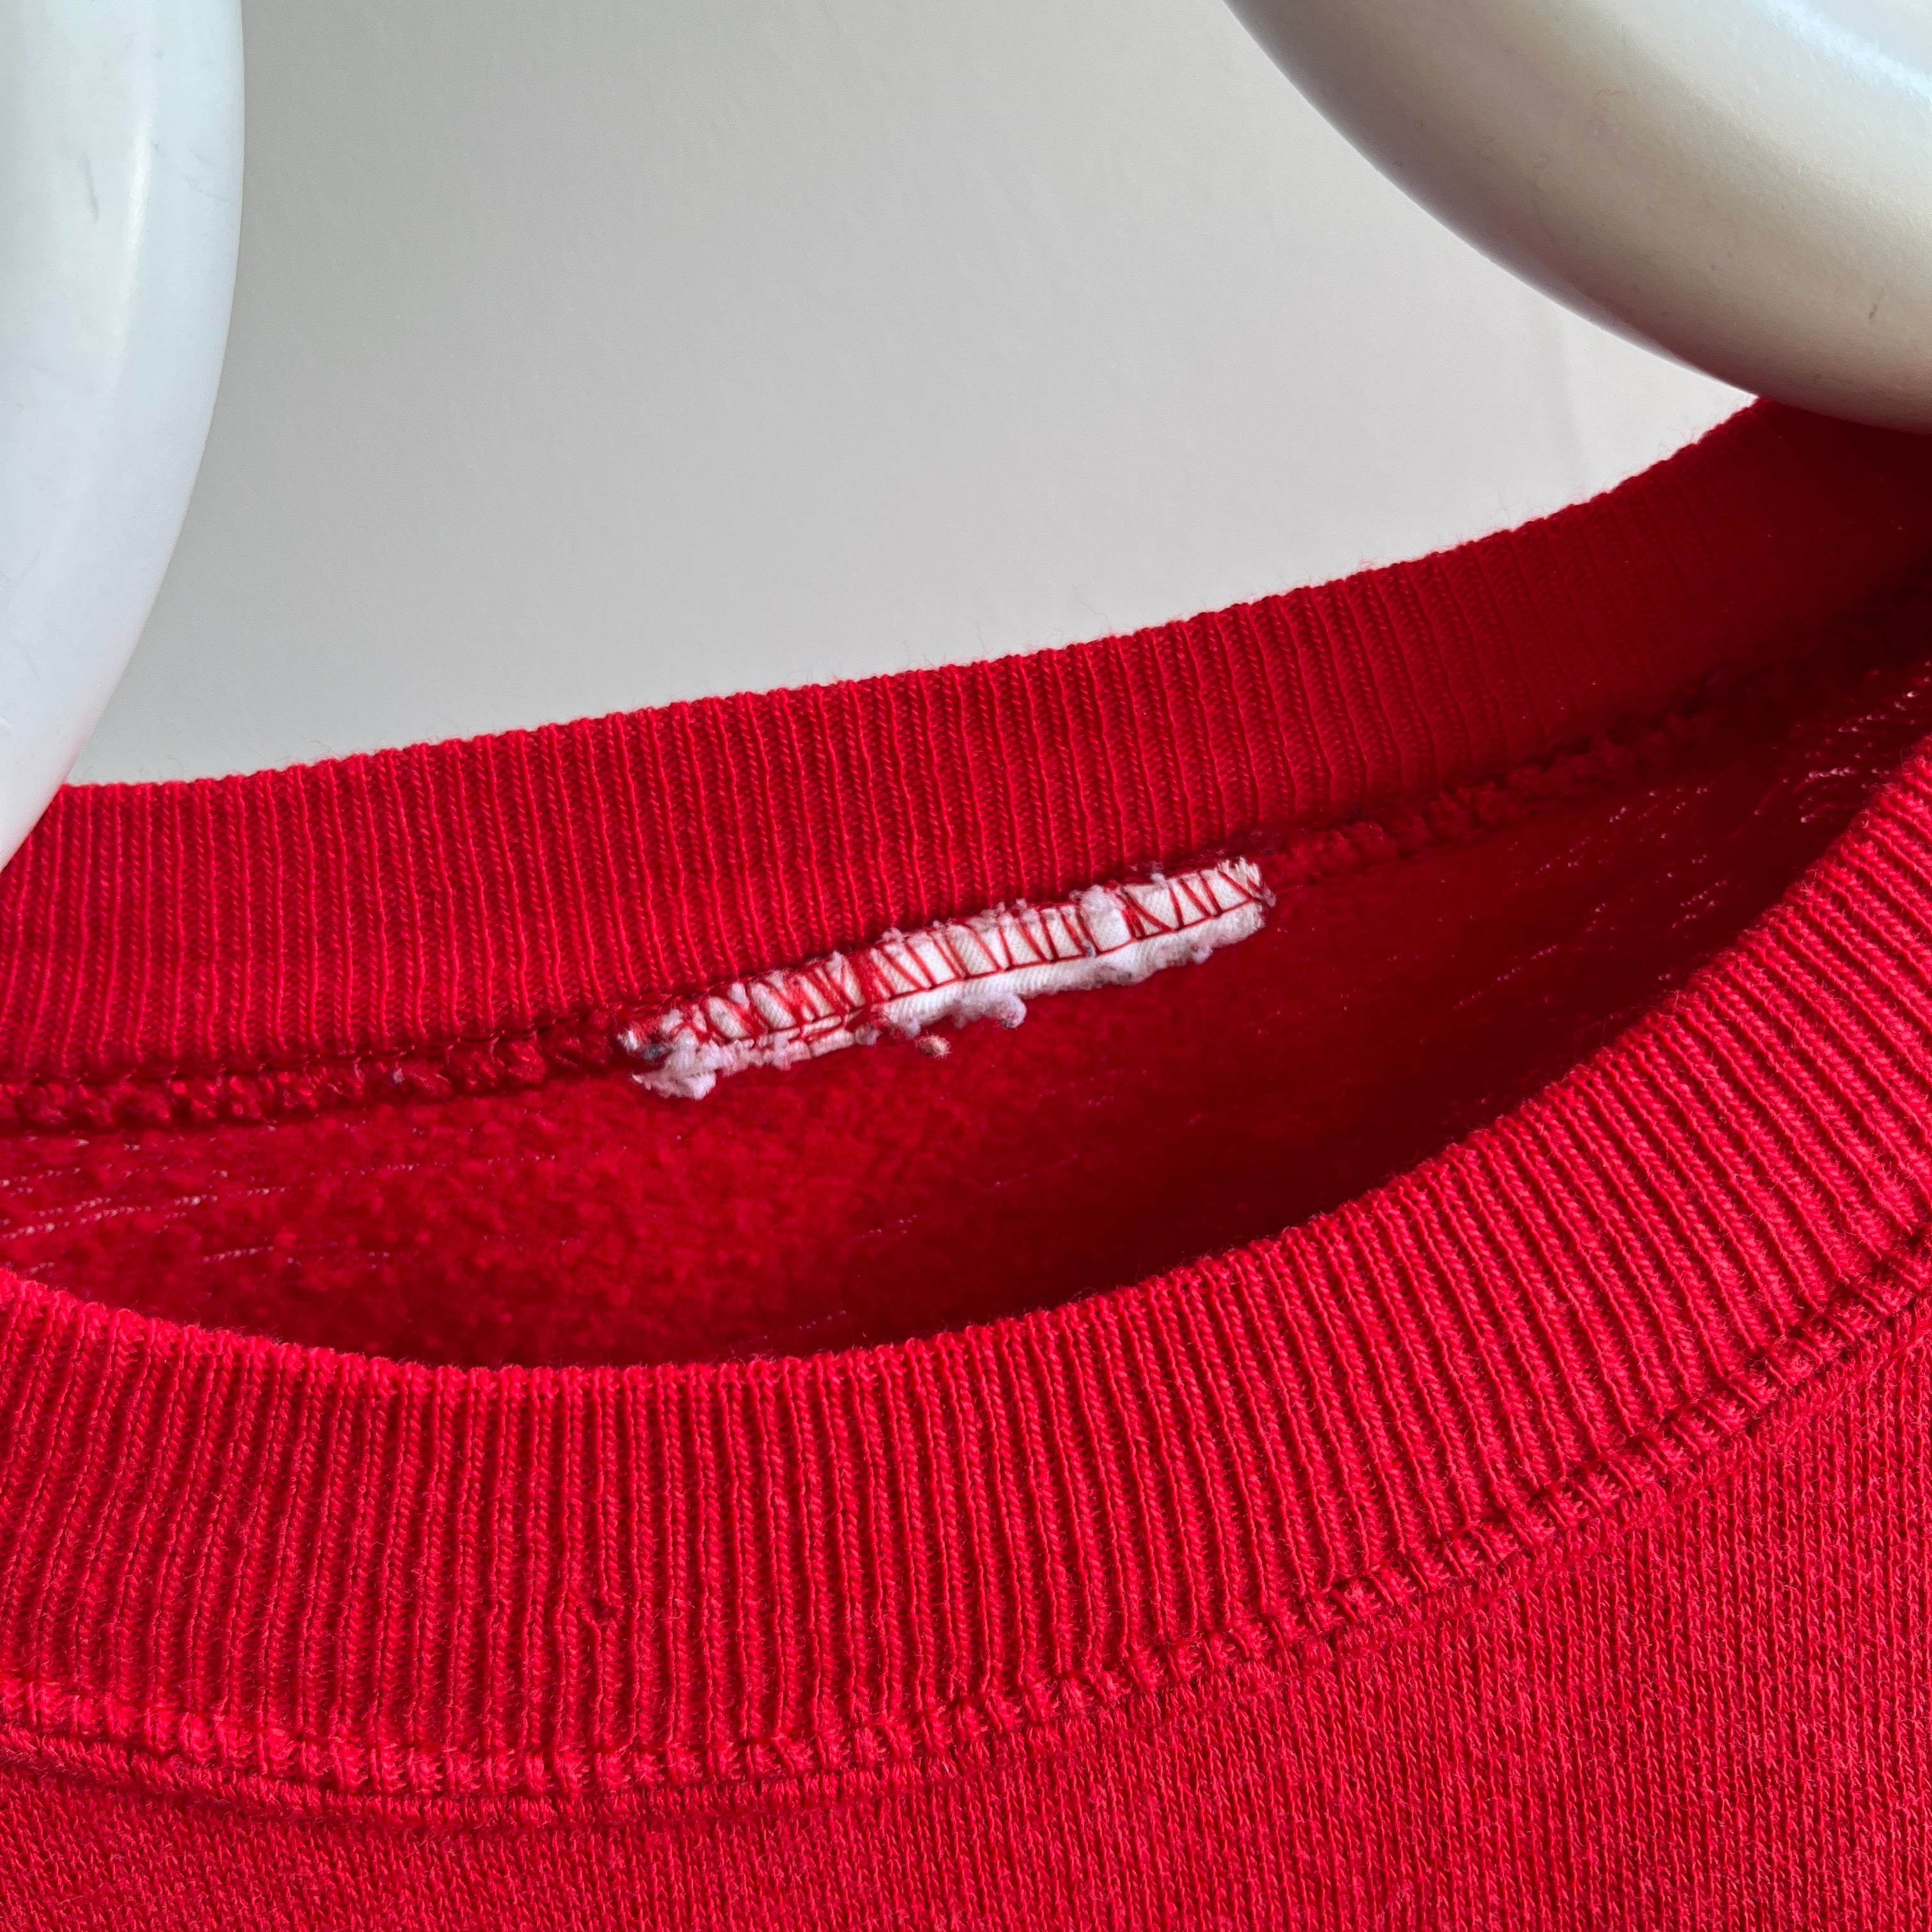 1980s Super Soft and Slouchy - Thinned Out - Wide, But Short - Blank Red Sweatshirt